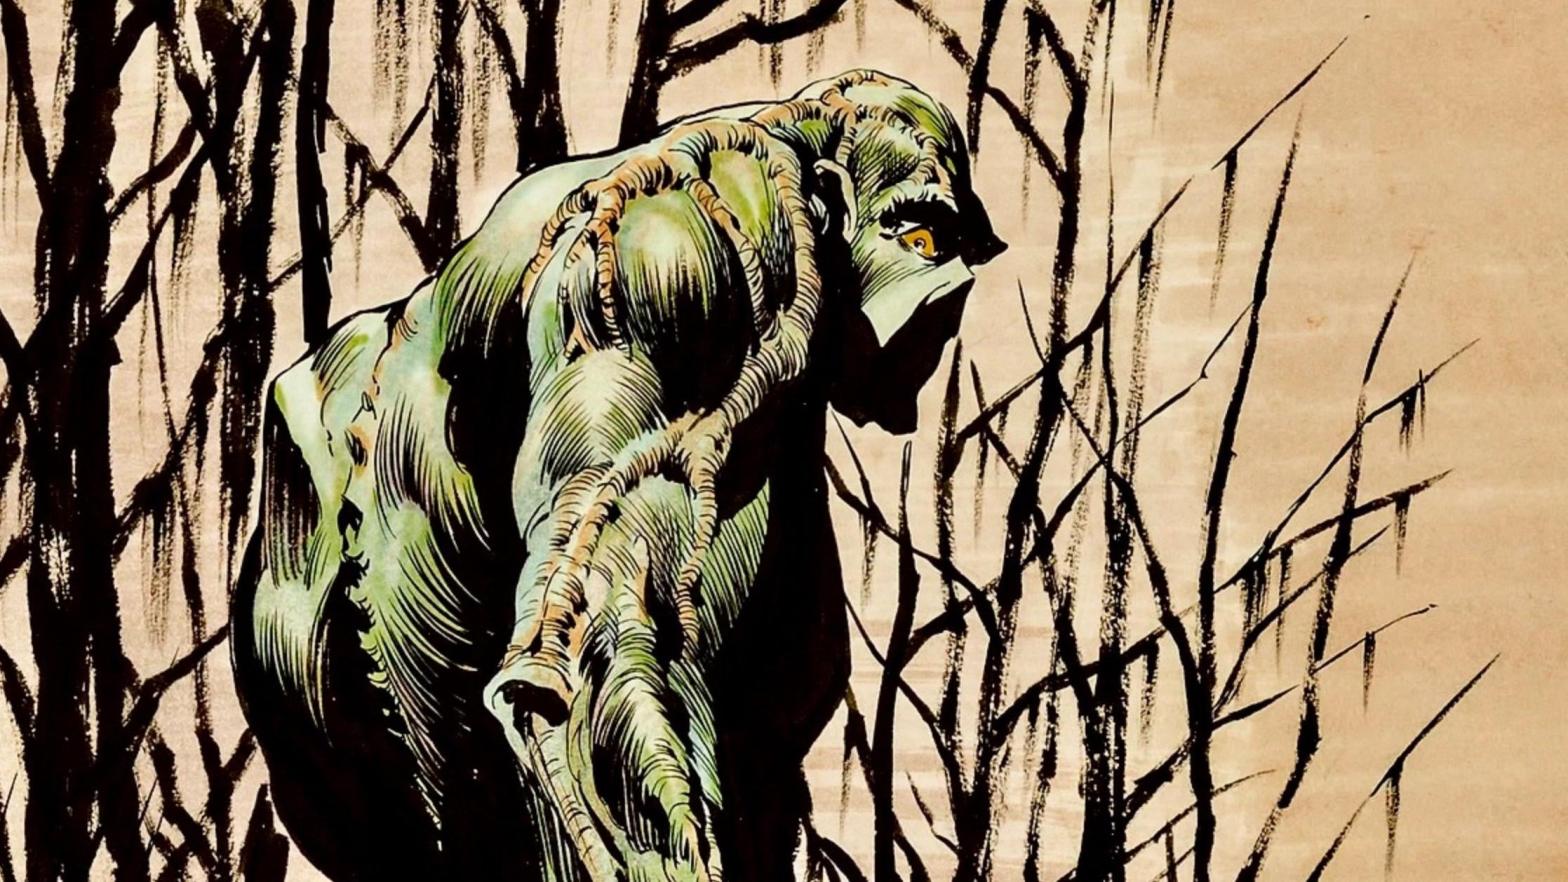 Swamp Thing is a big part of the DC Universe. (Image: DC Comics)